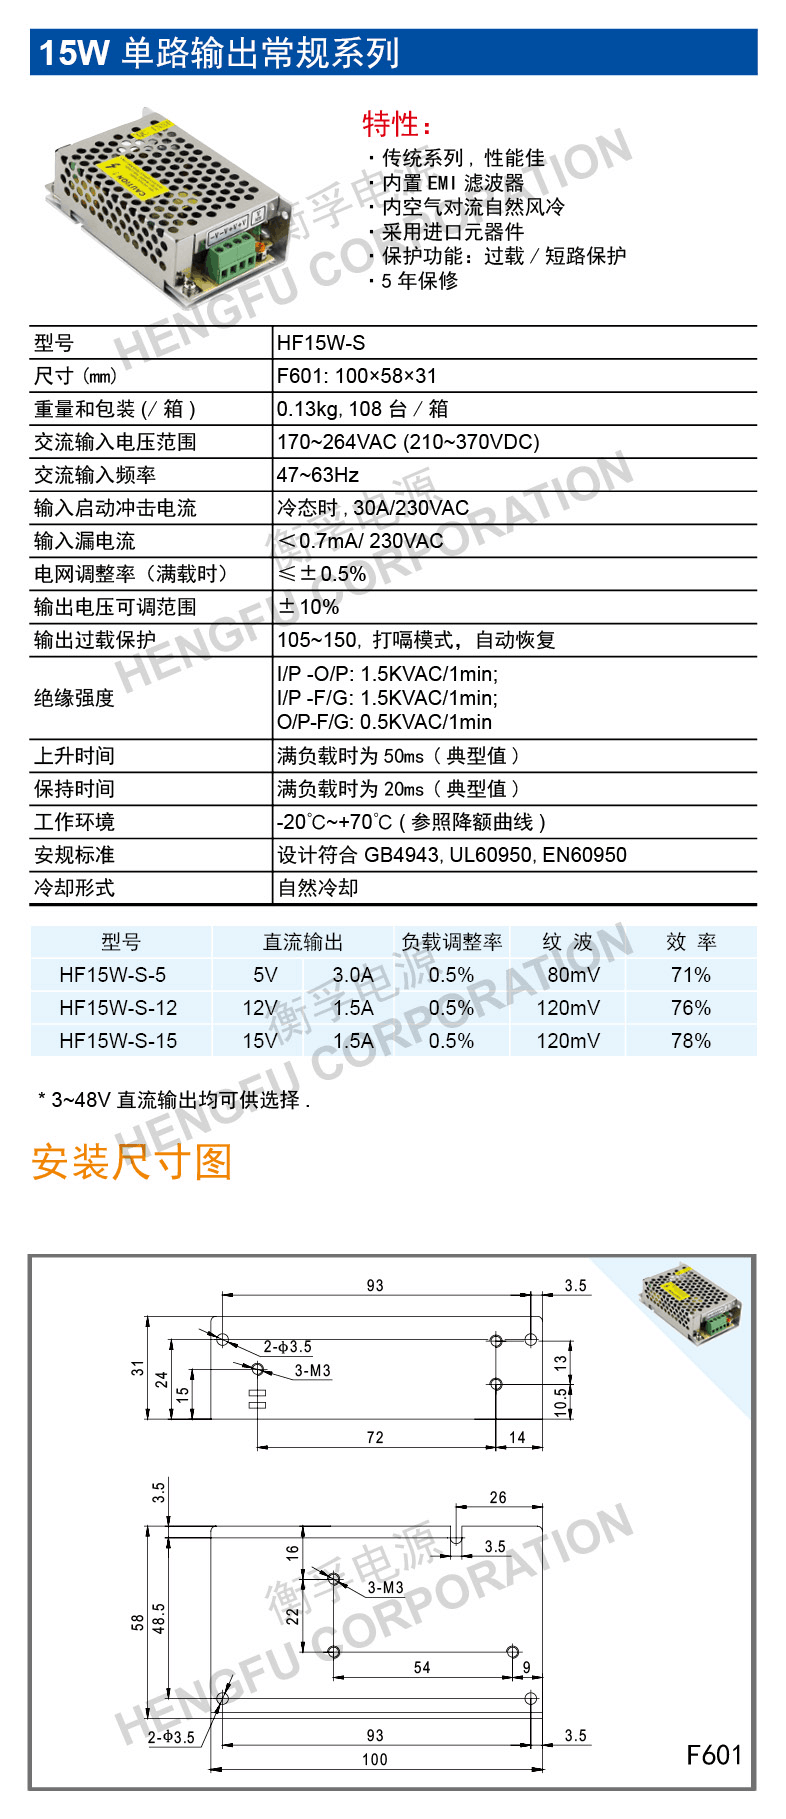 15W-s 规格书.png